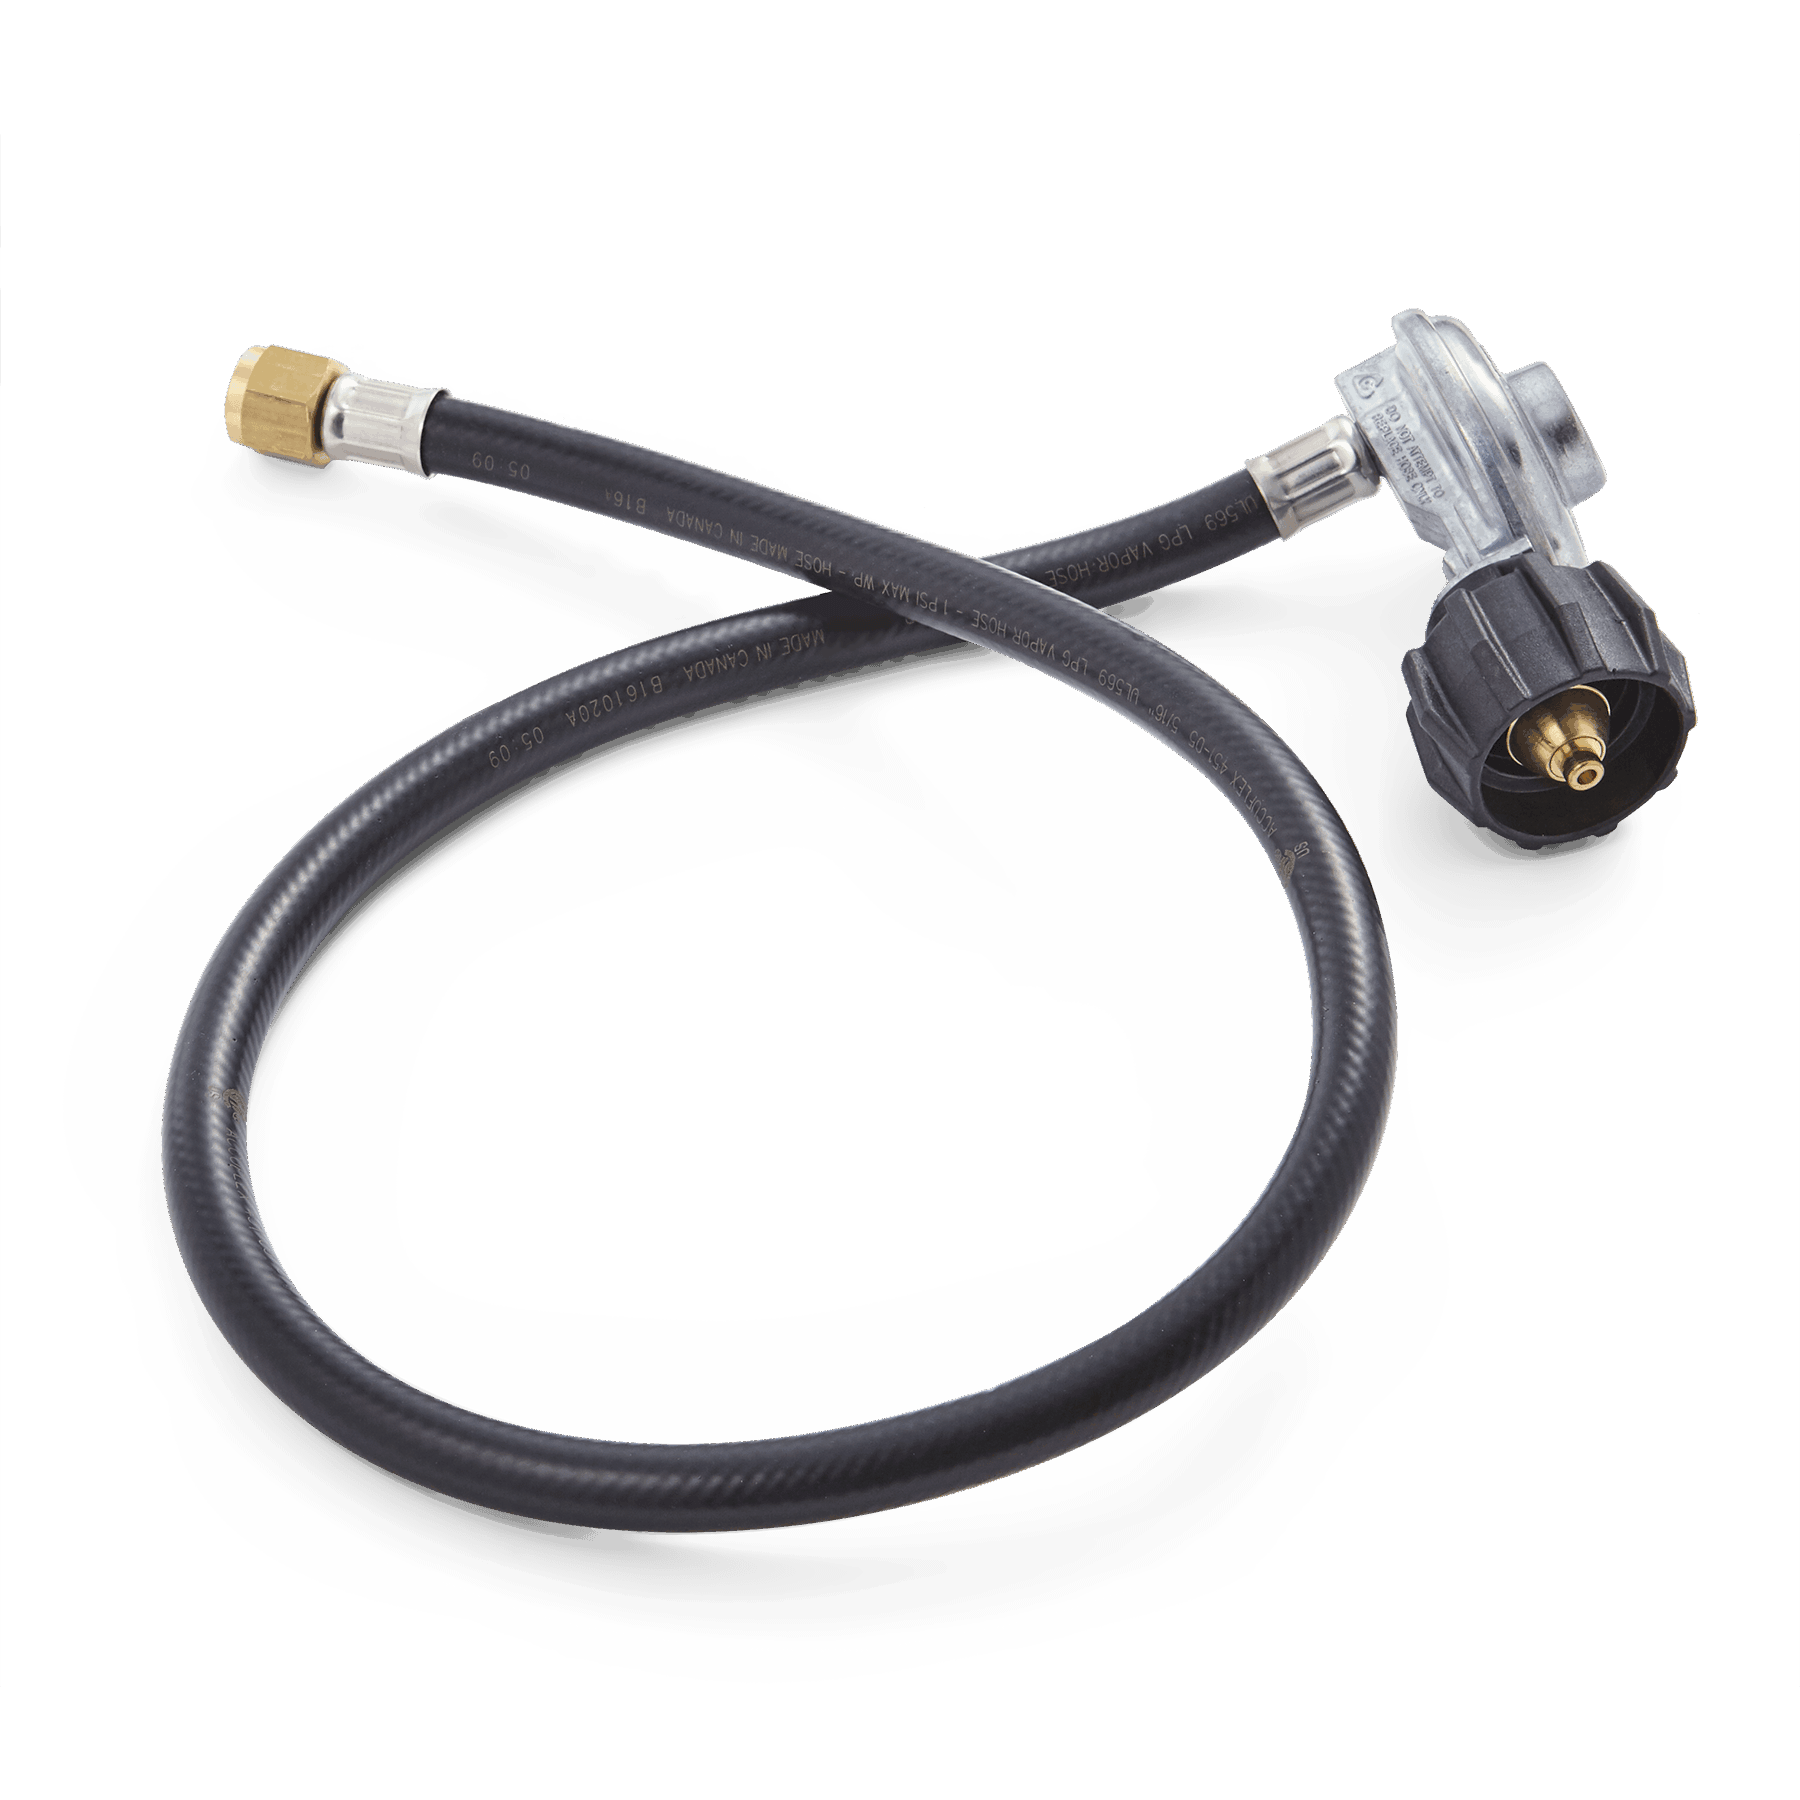 21 Inch QCC1 Hose and Regulator Kit Replacement parts for Weber propane grills 